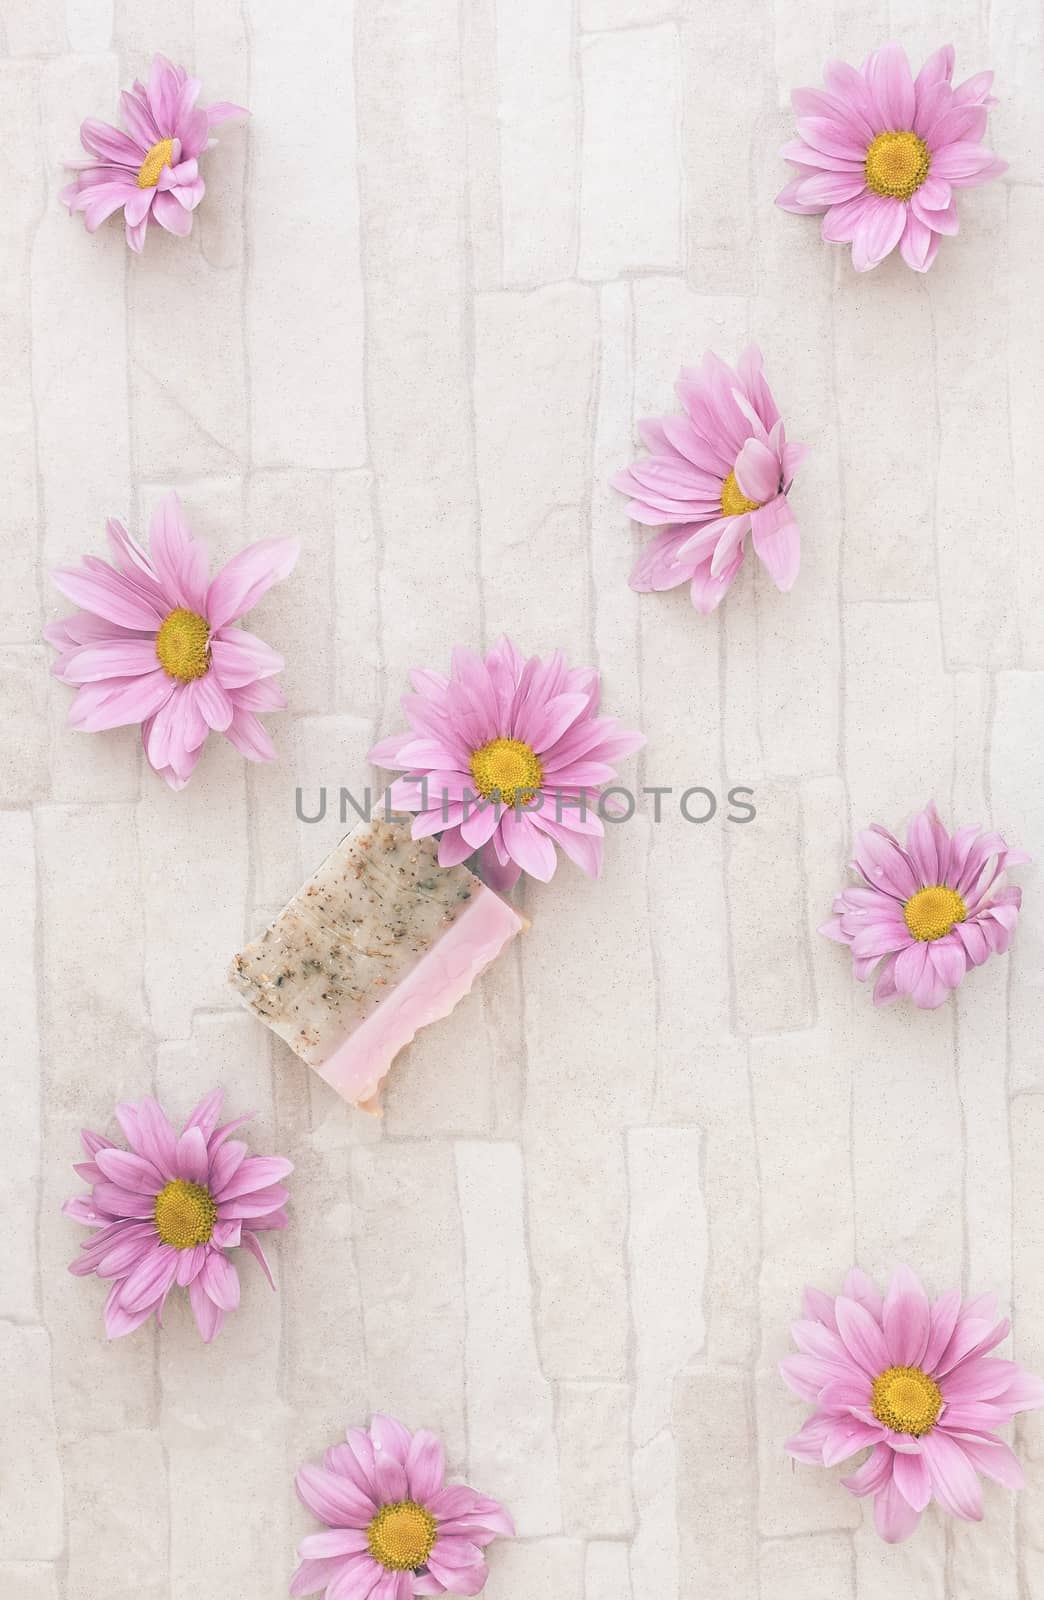 Spa still life of homemade bar of soap with chrysanthemum flowers. Overhead view with blank space